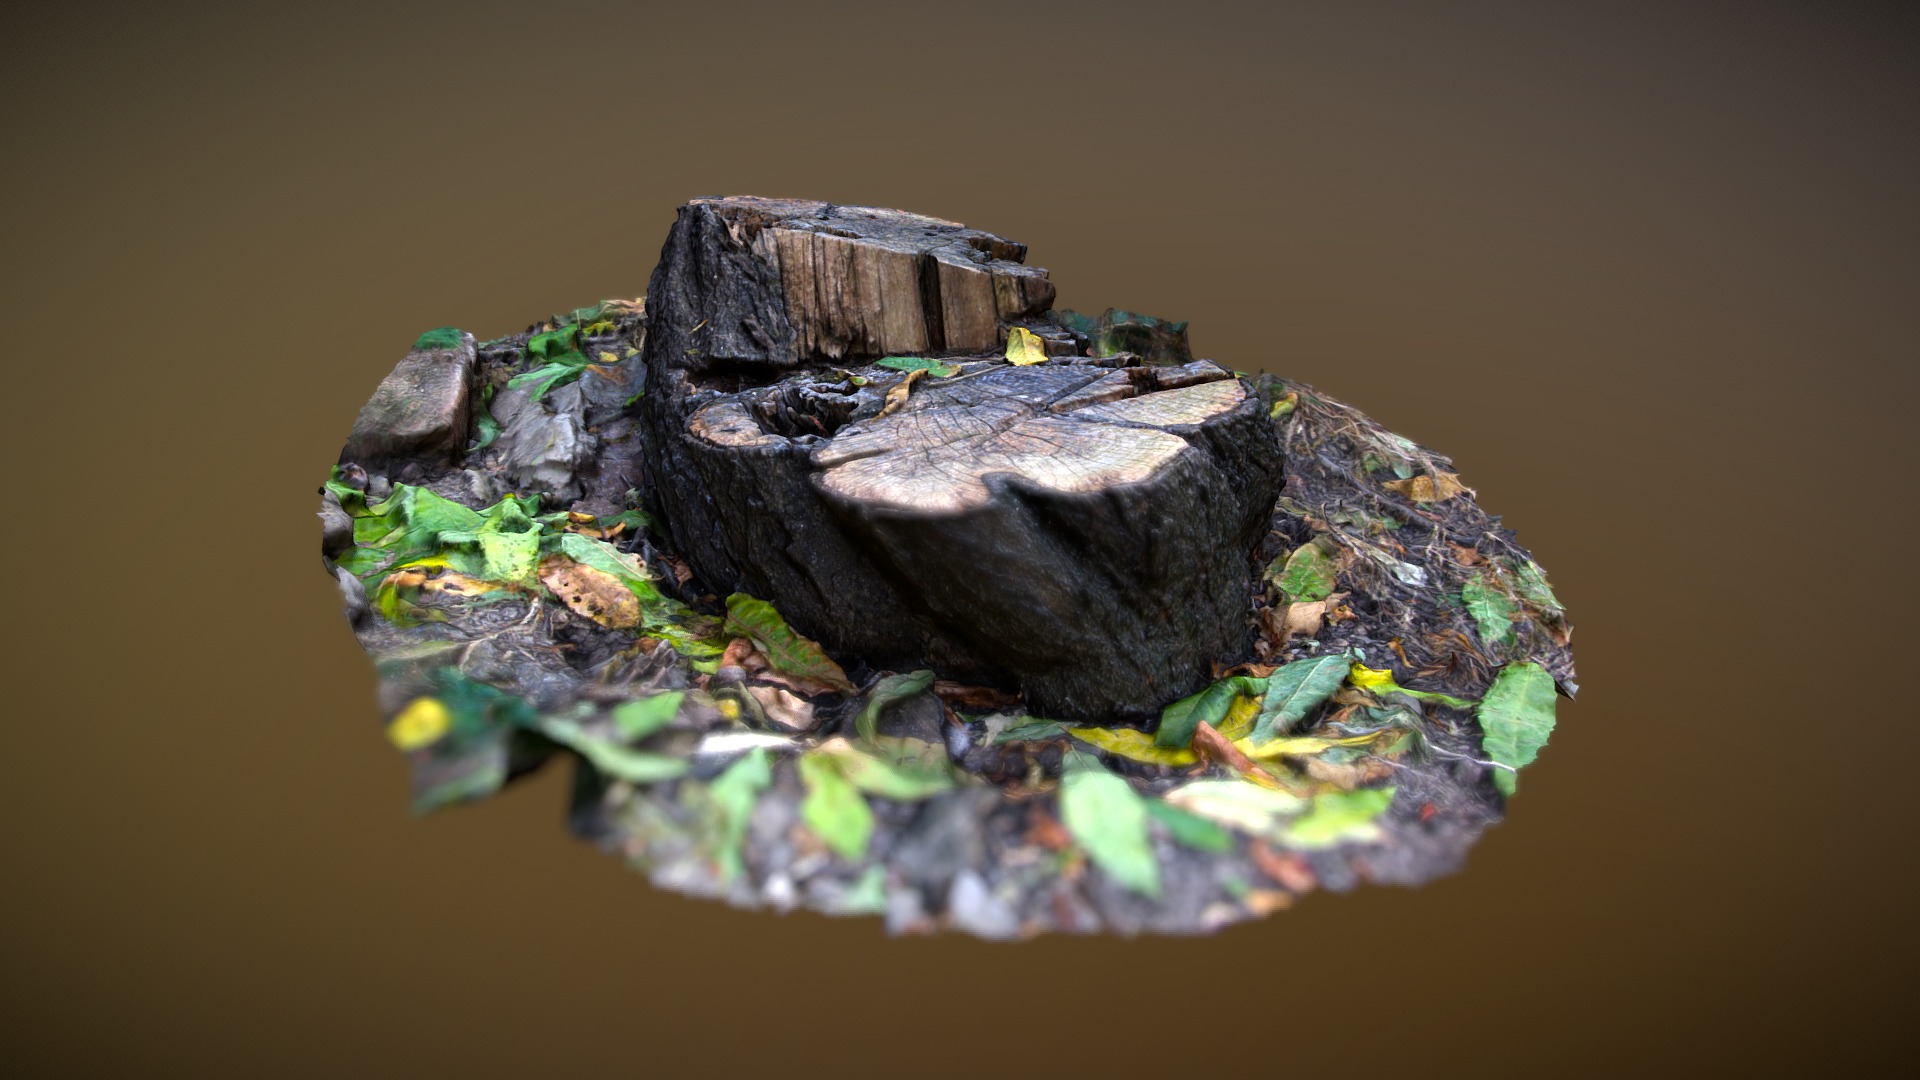 3D model Old Trunk - This is a 3D model of the Old Trunk. The 3D model is about a turtle on a rock.